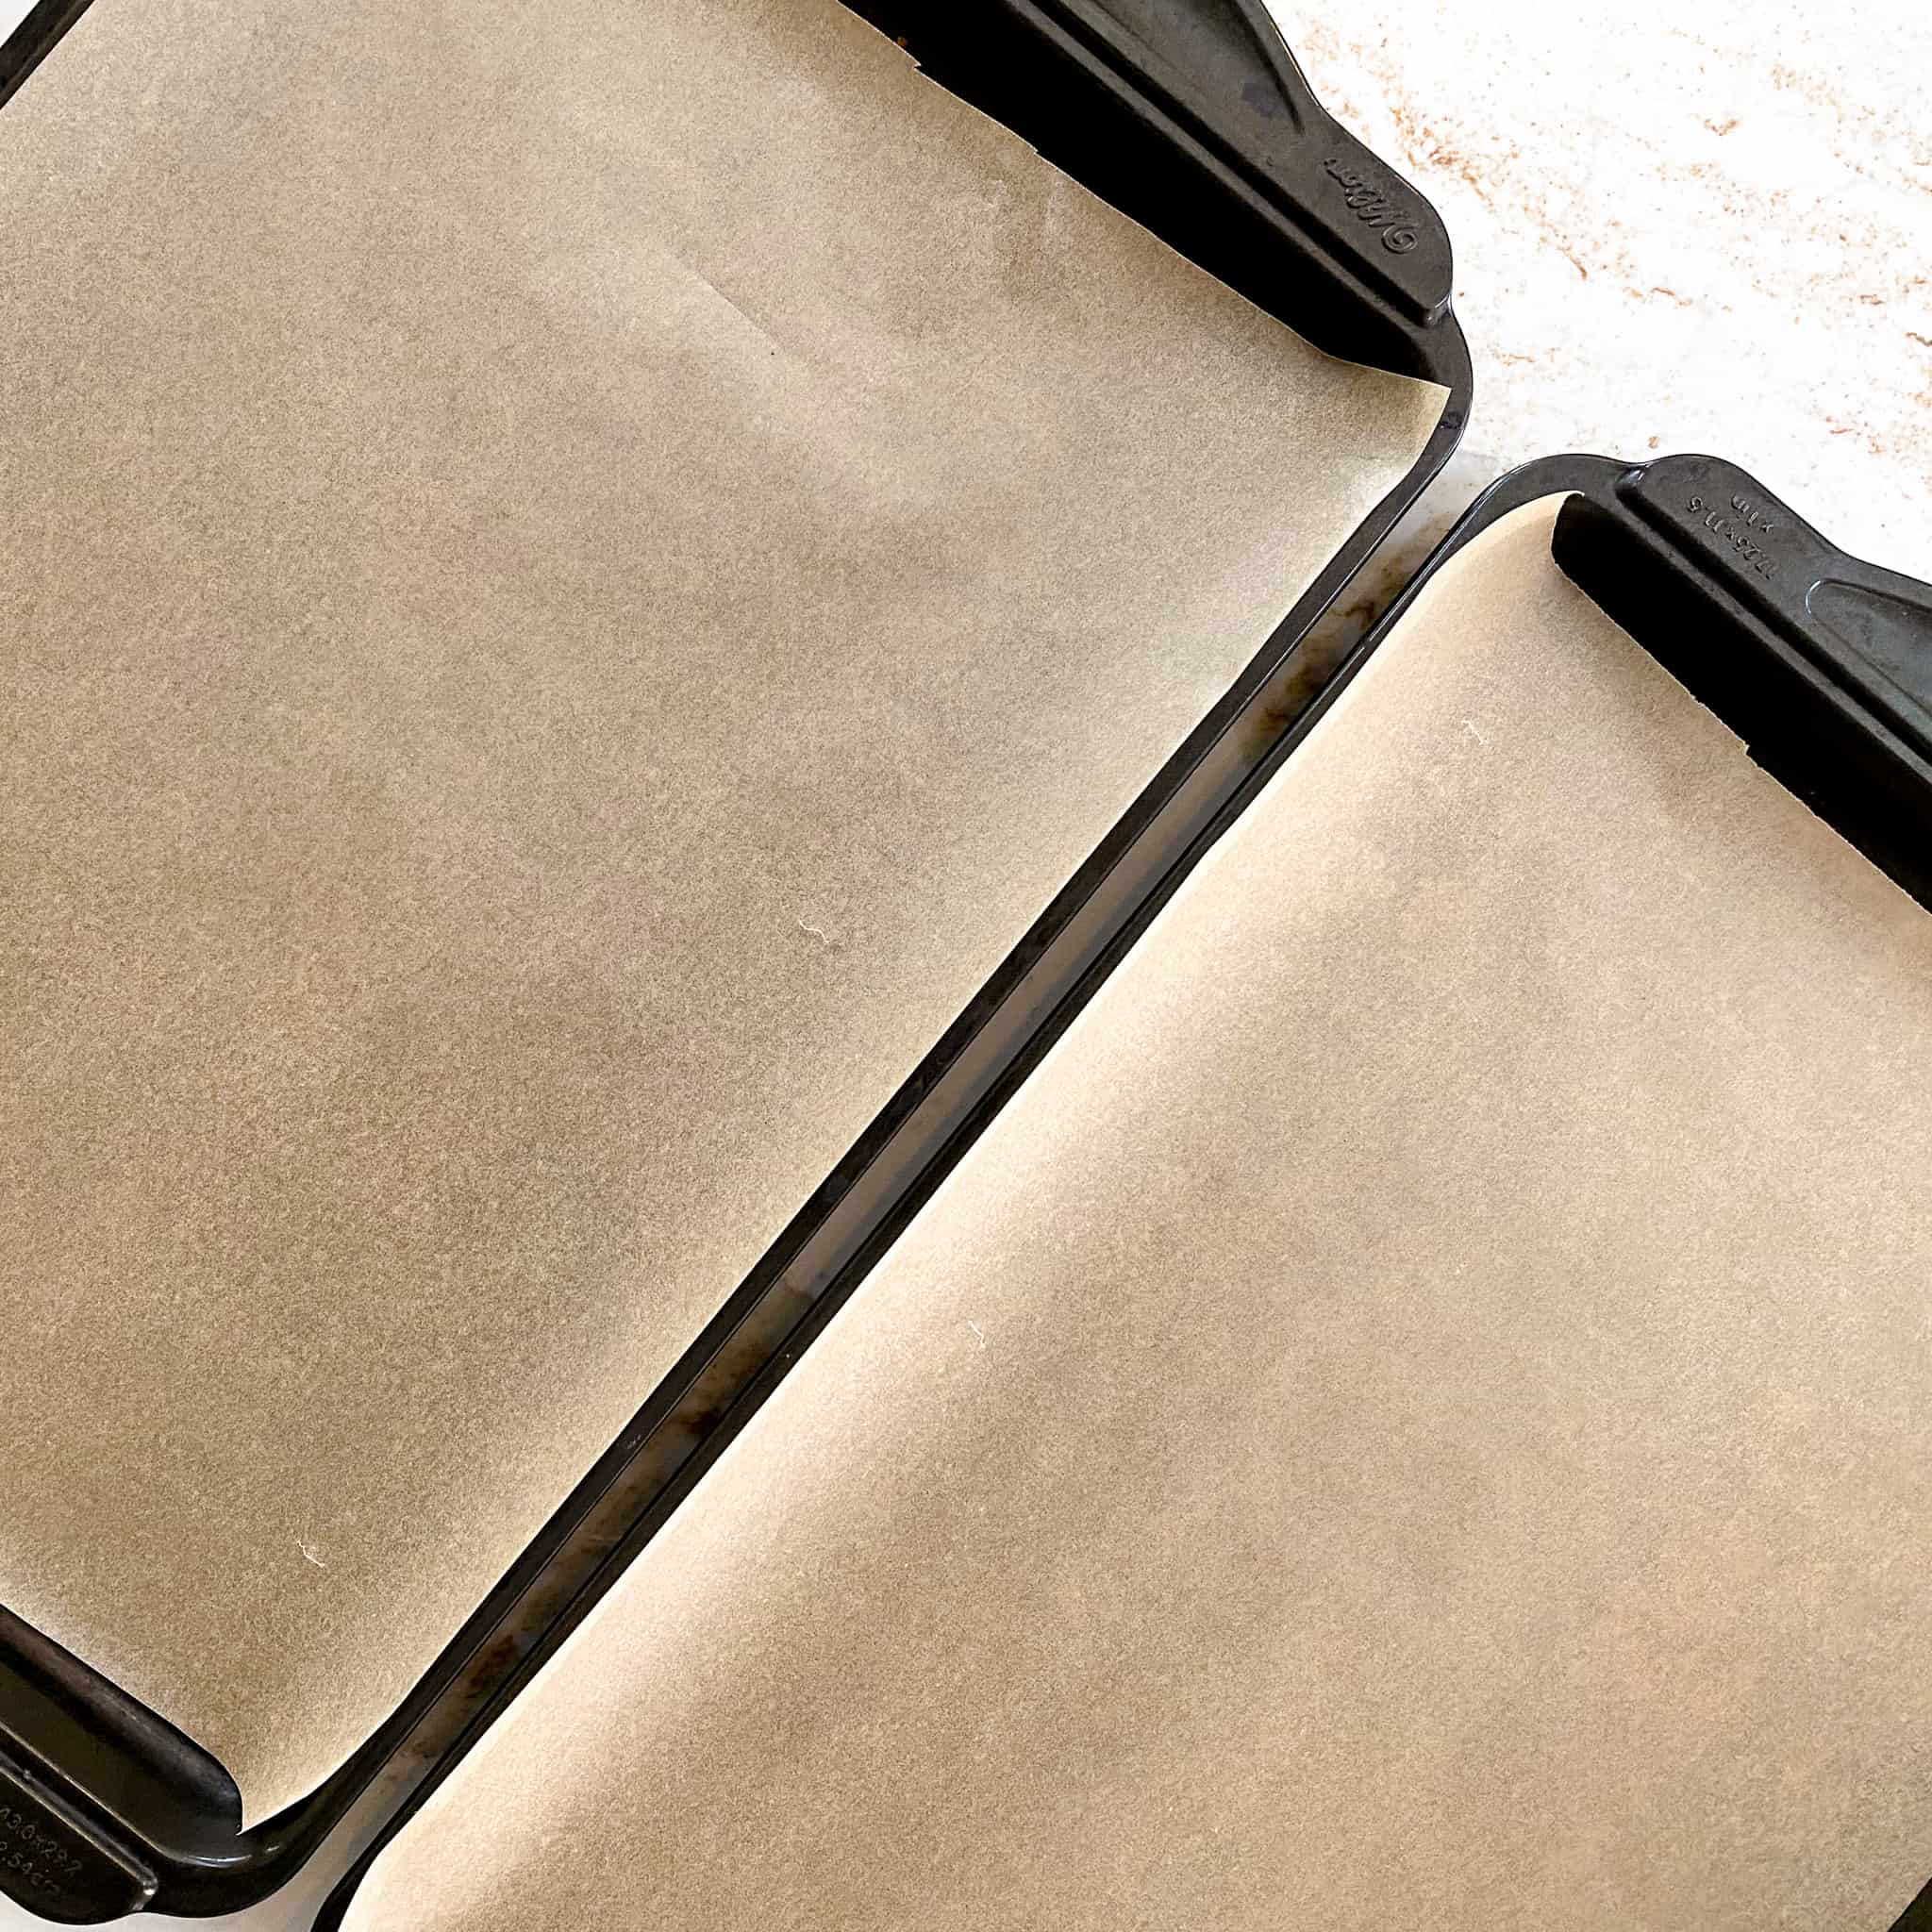 Cookie sheets lined with parchment paper.